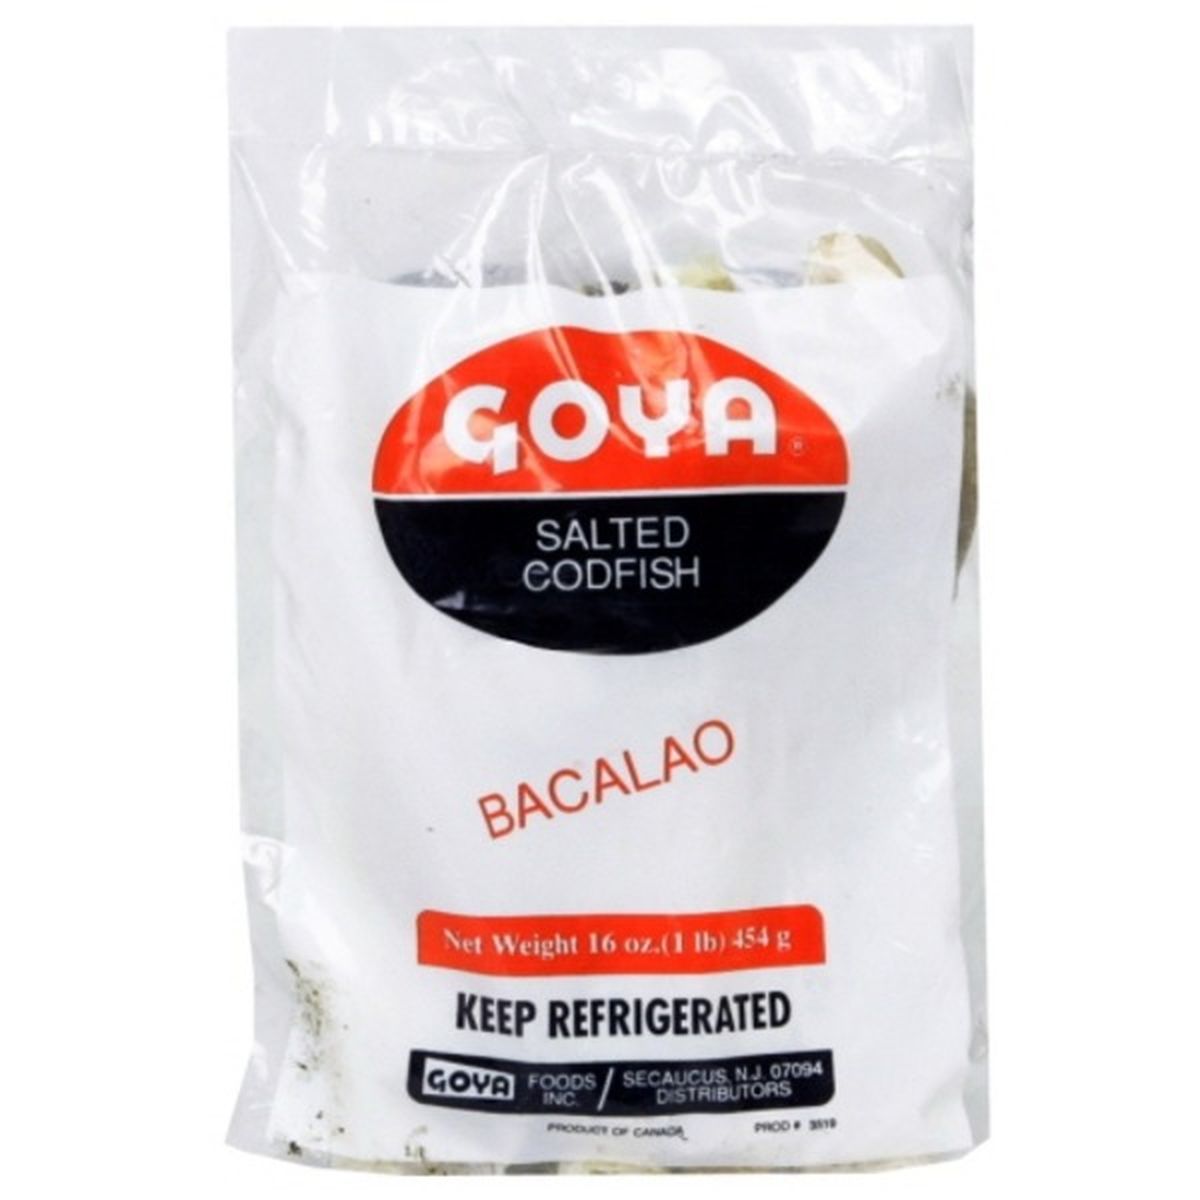 Calories in Goya Salted Codfish, Bacalao, Pre-Priced